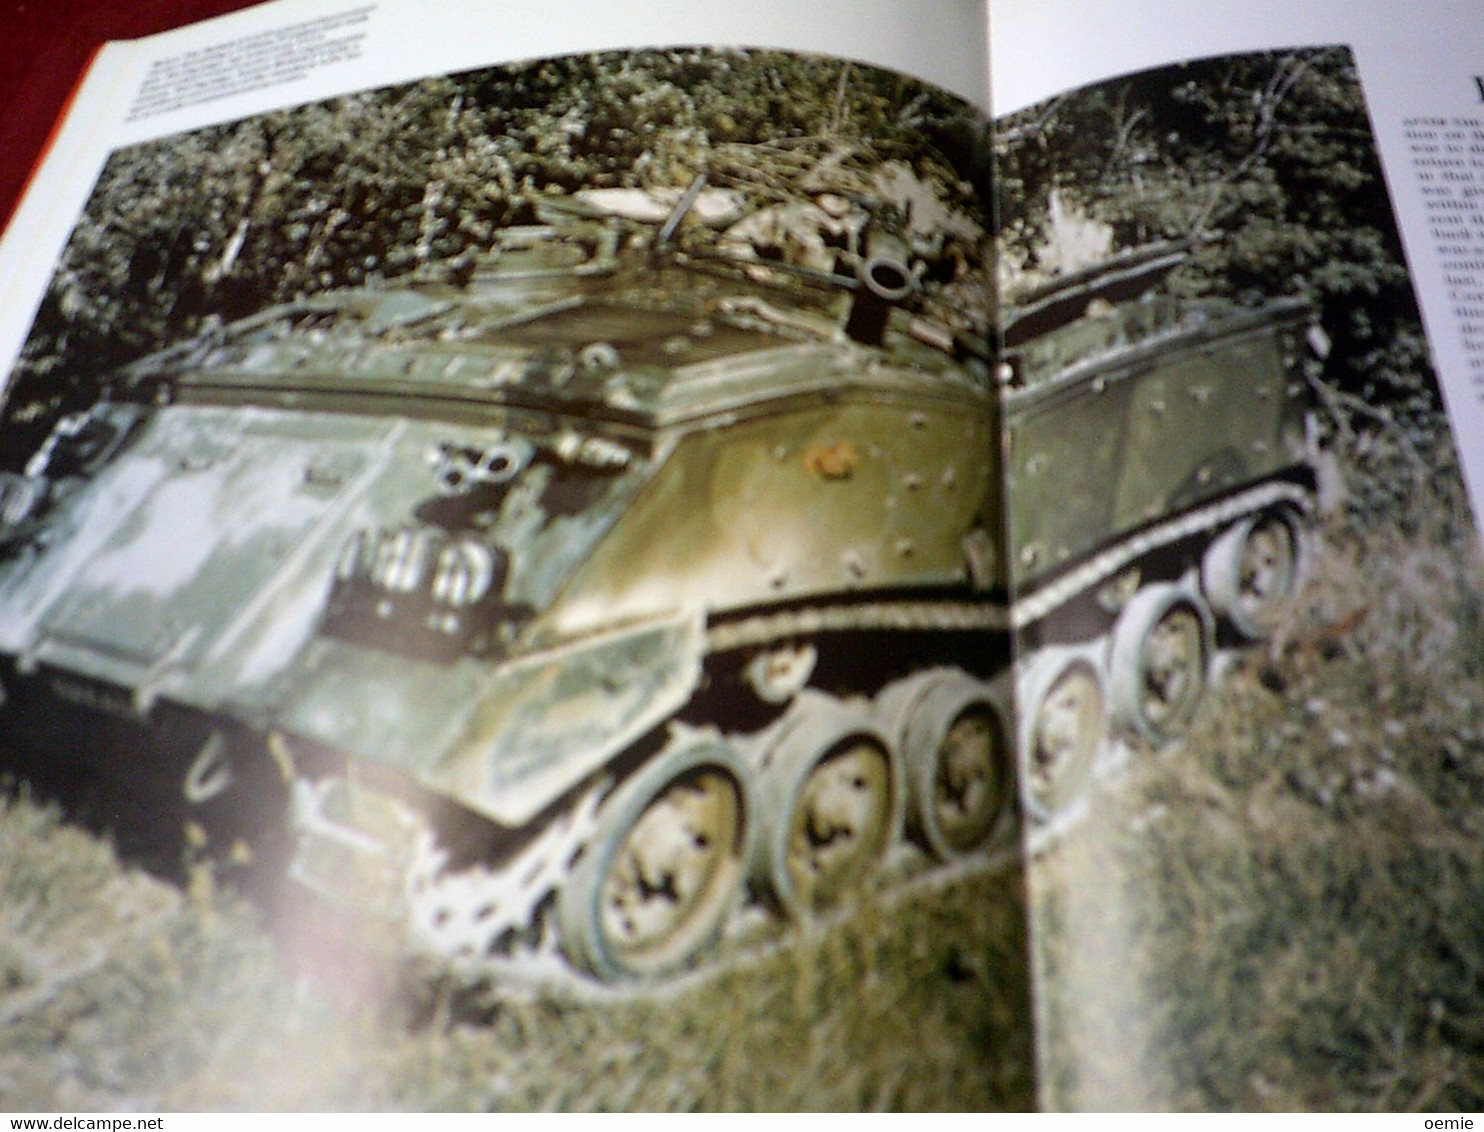 AND ILLUSTRATED HISTORY OF  MILITARY VEHICLES  / BY IAN V HOGG AND JOHN WEEKS